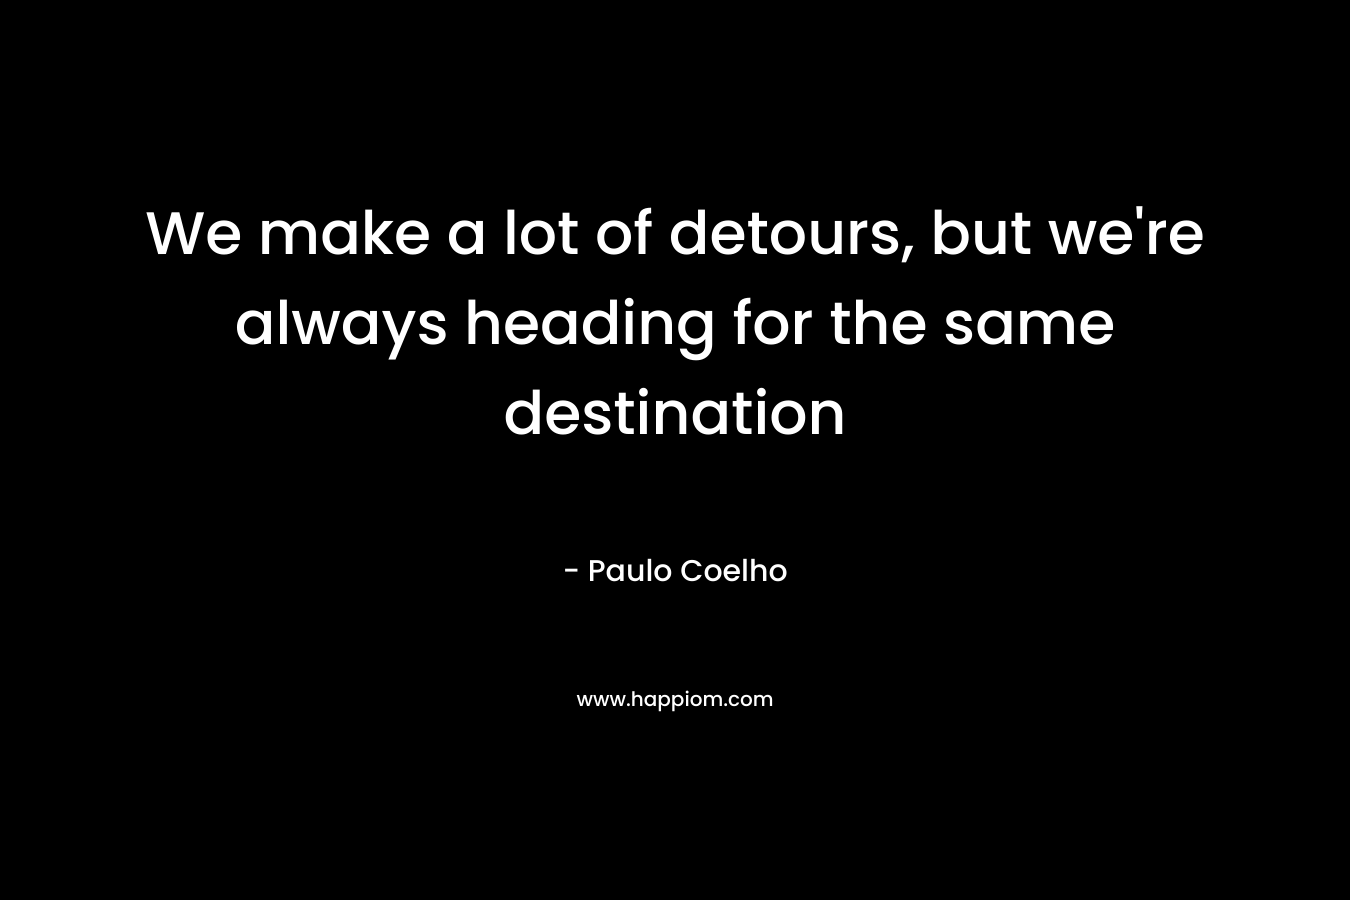 We make a lot of detours, but we're always heading for the same destination